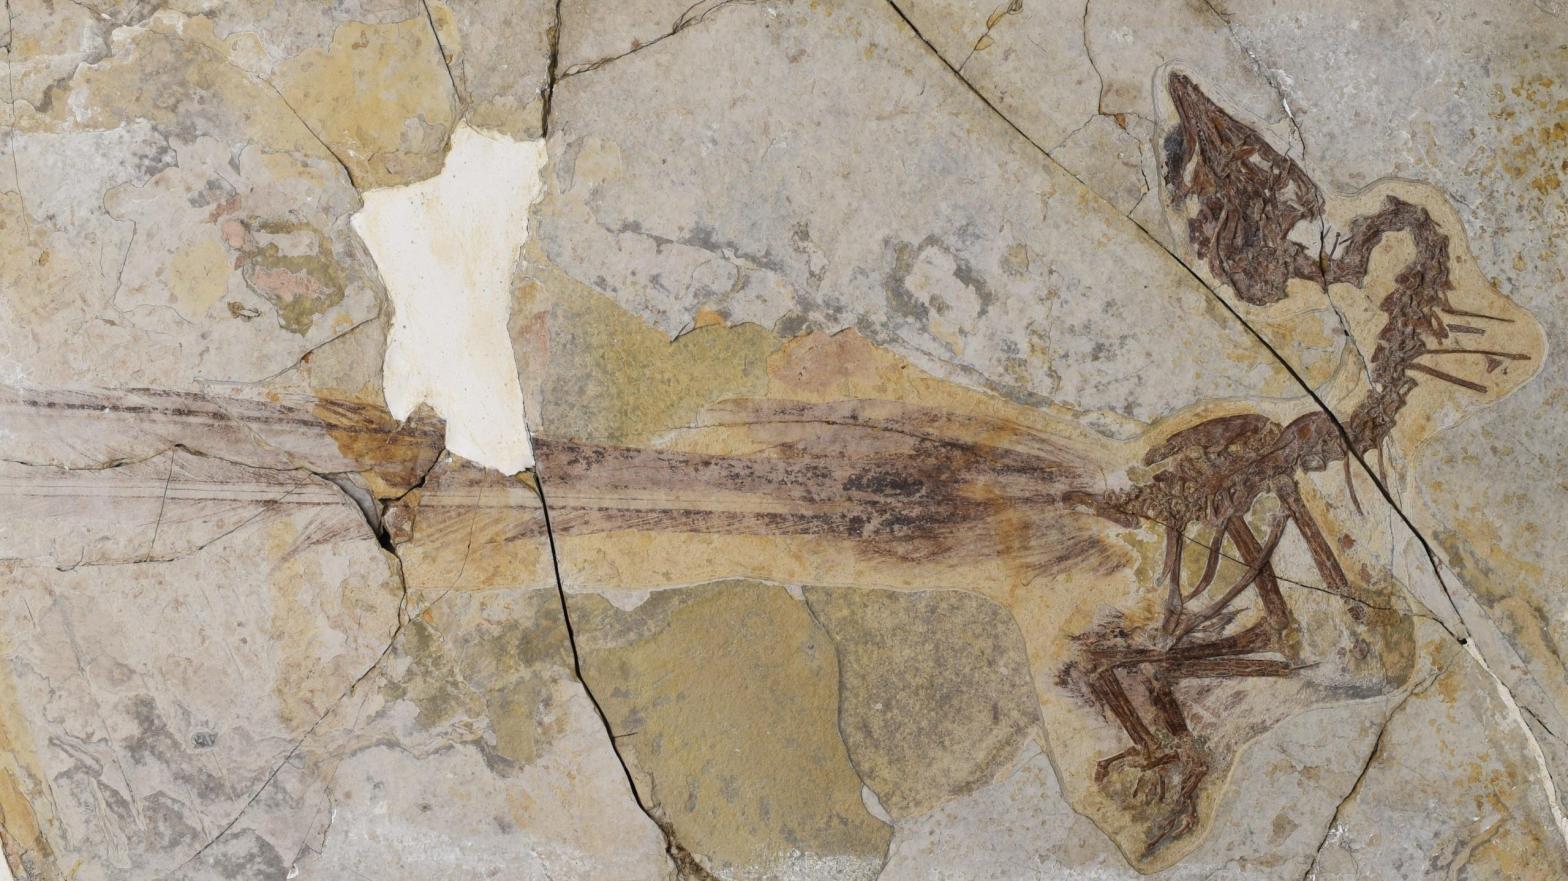 The new ancient bird fossil showing a pair of elongated tail feathers.  (Image: M. Wang et al., 2021/Current Biology)